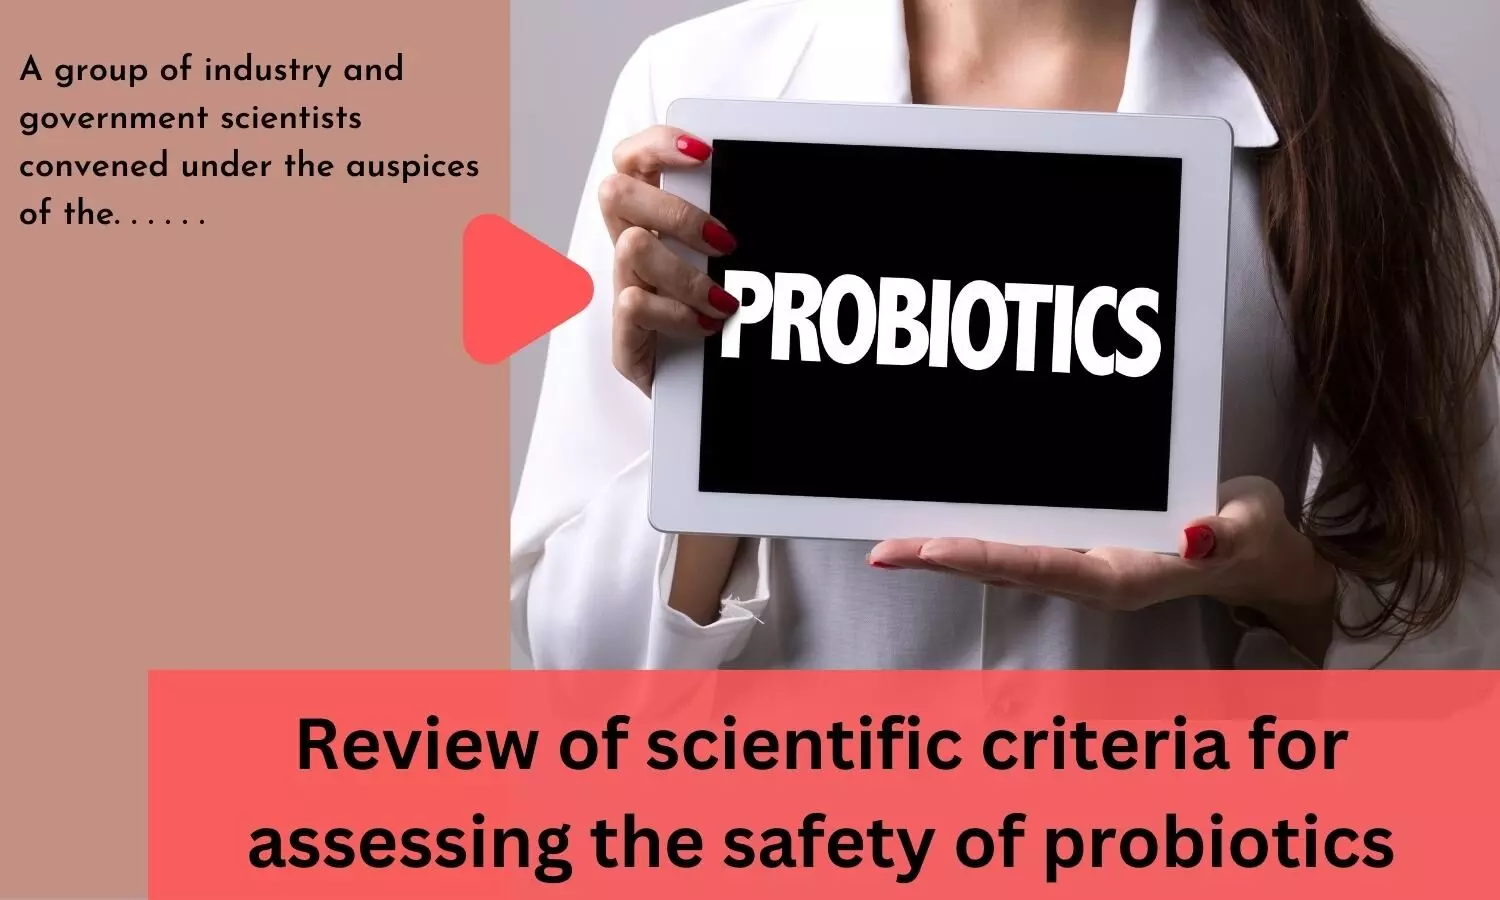 Review of scientific criteria for assessing the safety of probiotics